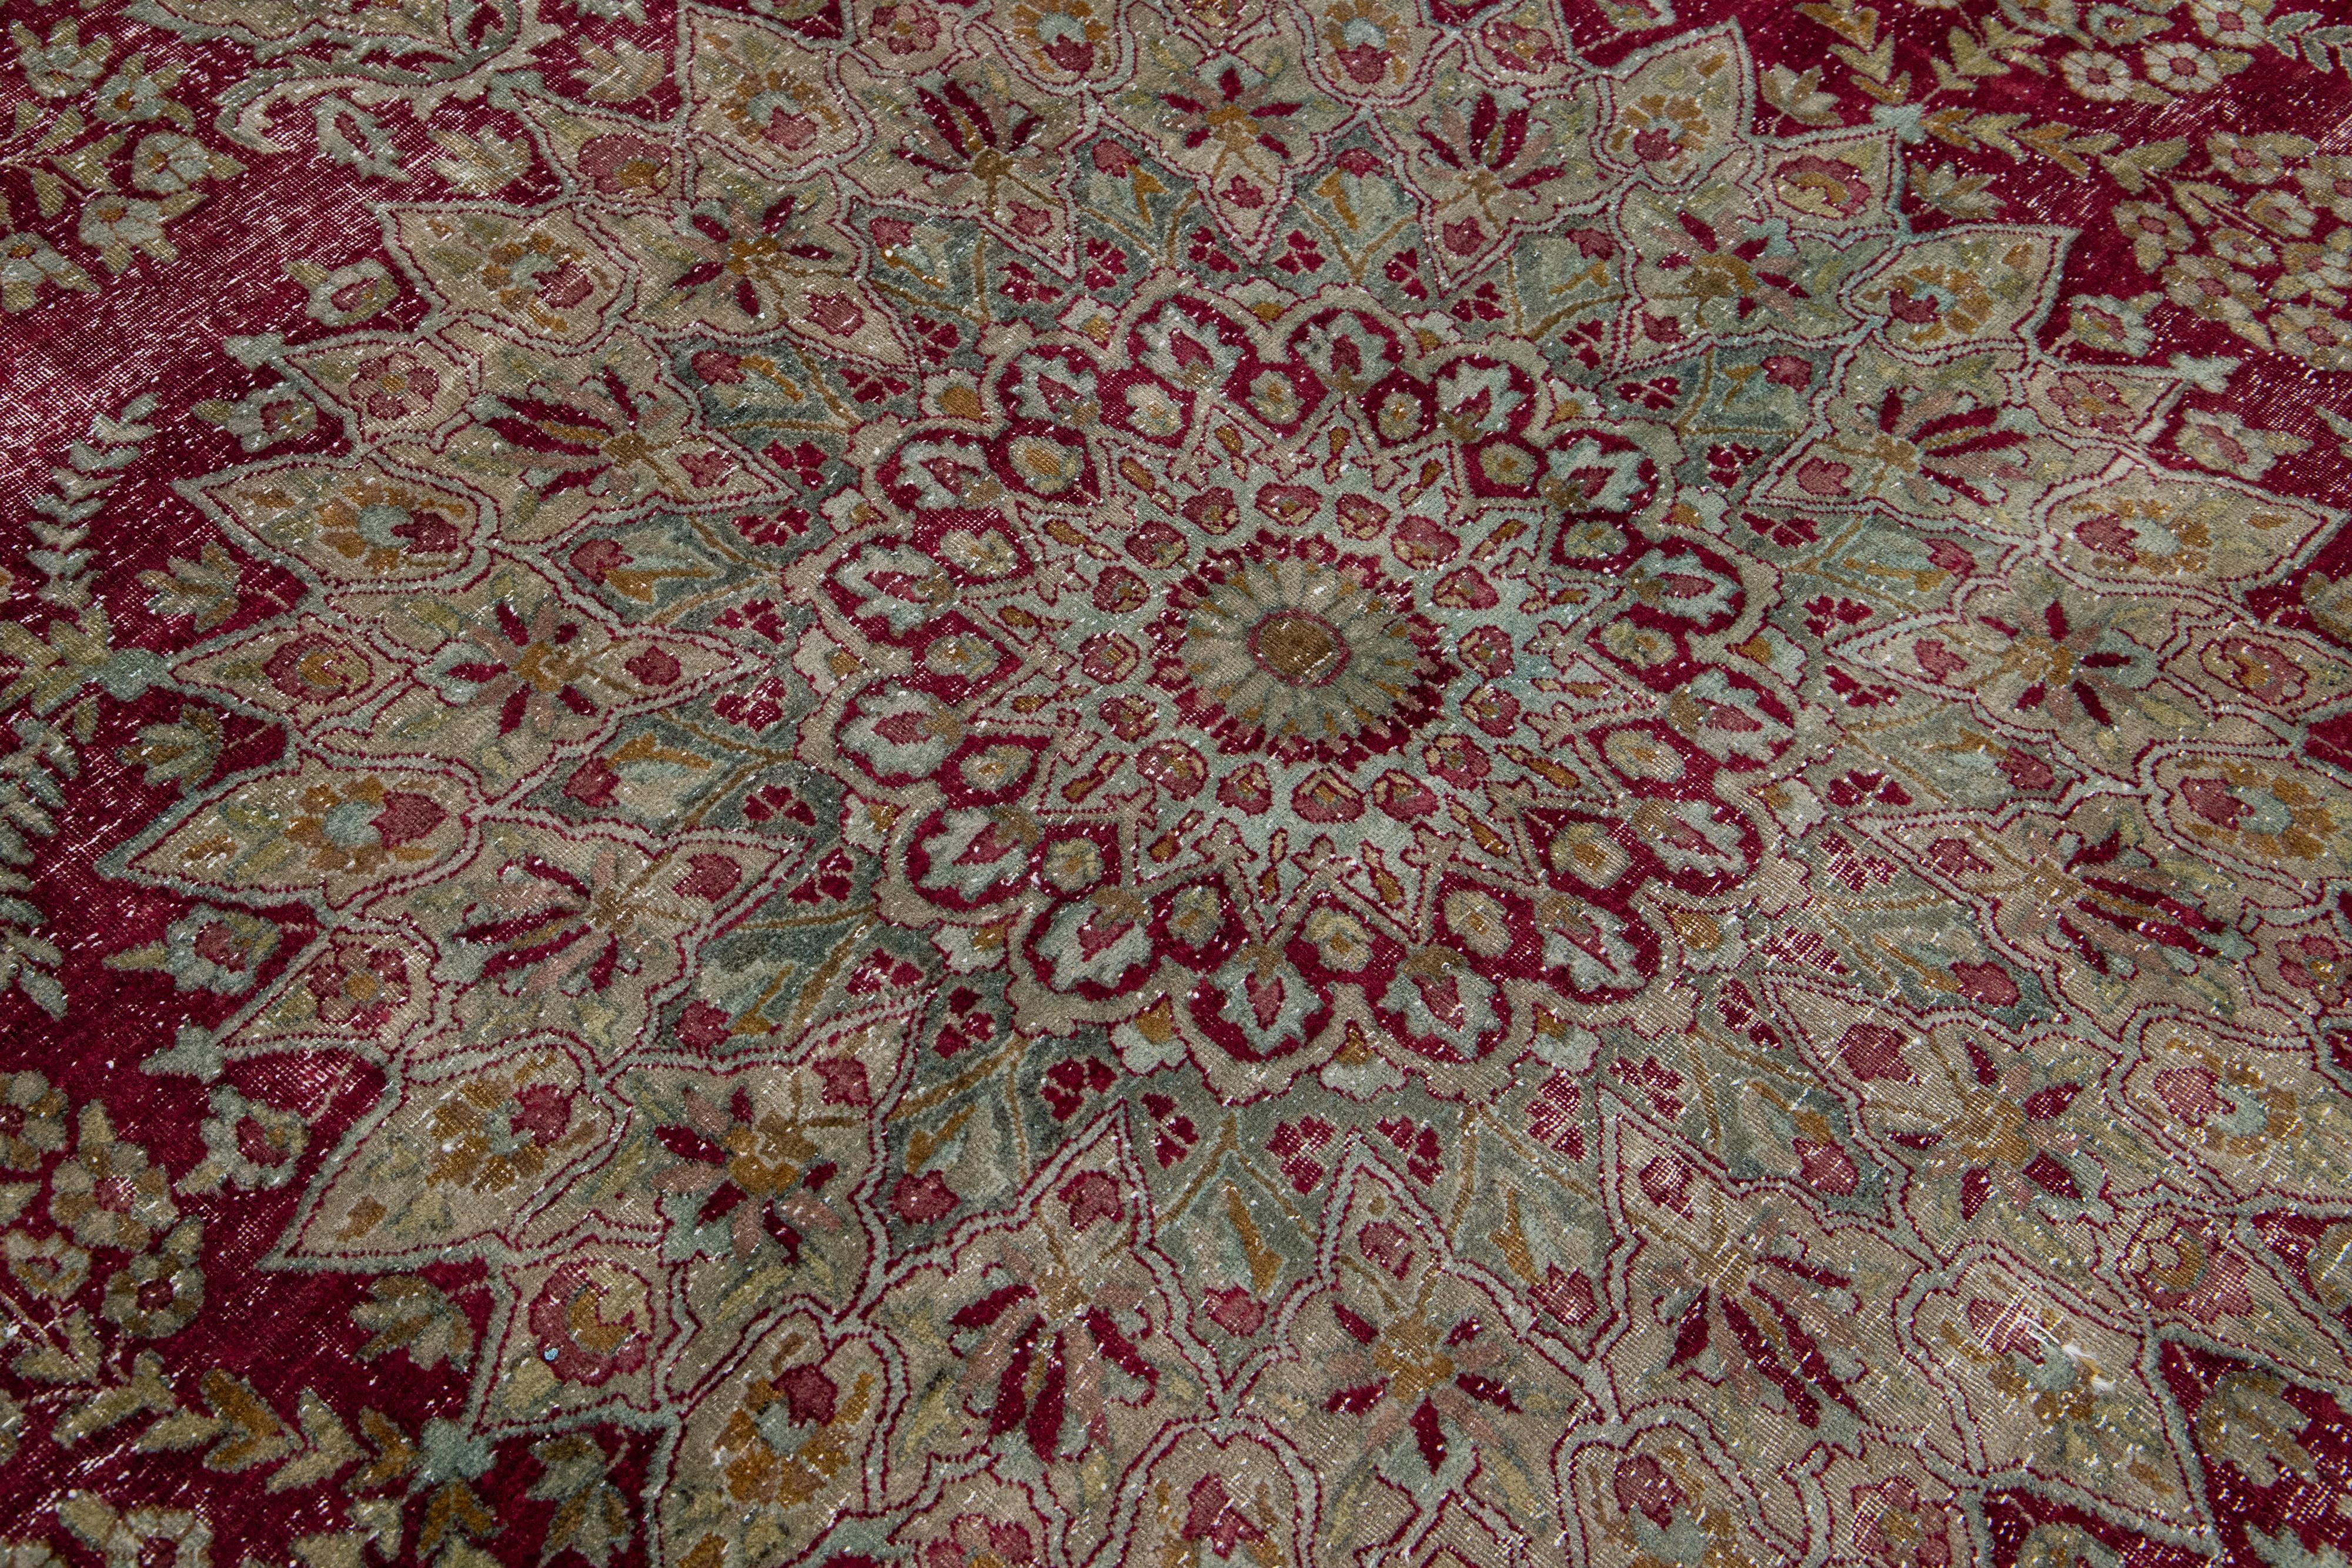 Antique Wool Rug Persian Kerman featuring a Medallion Floral Motif  In Good Condition For Sale In Norwalk, CT